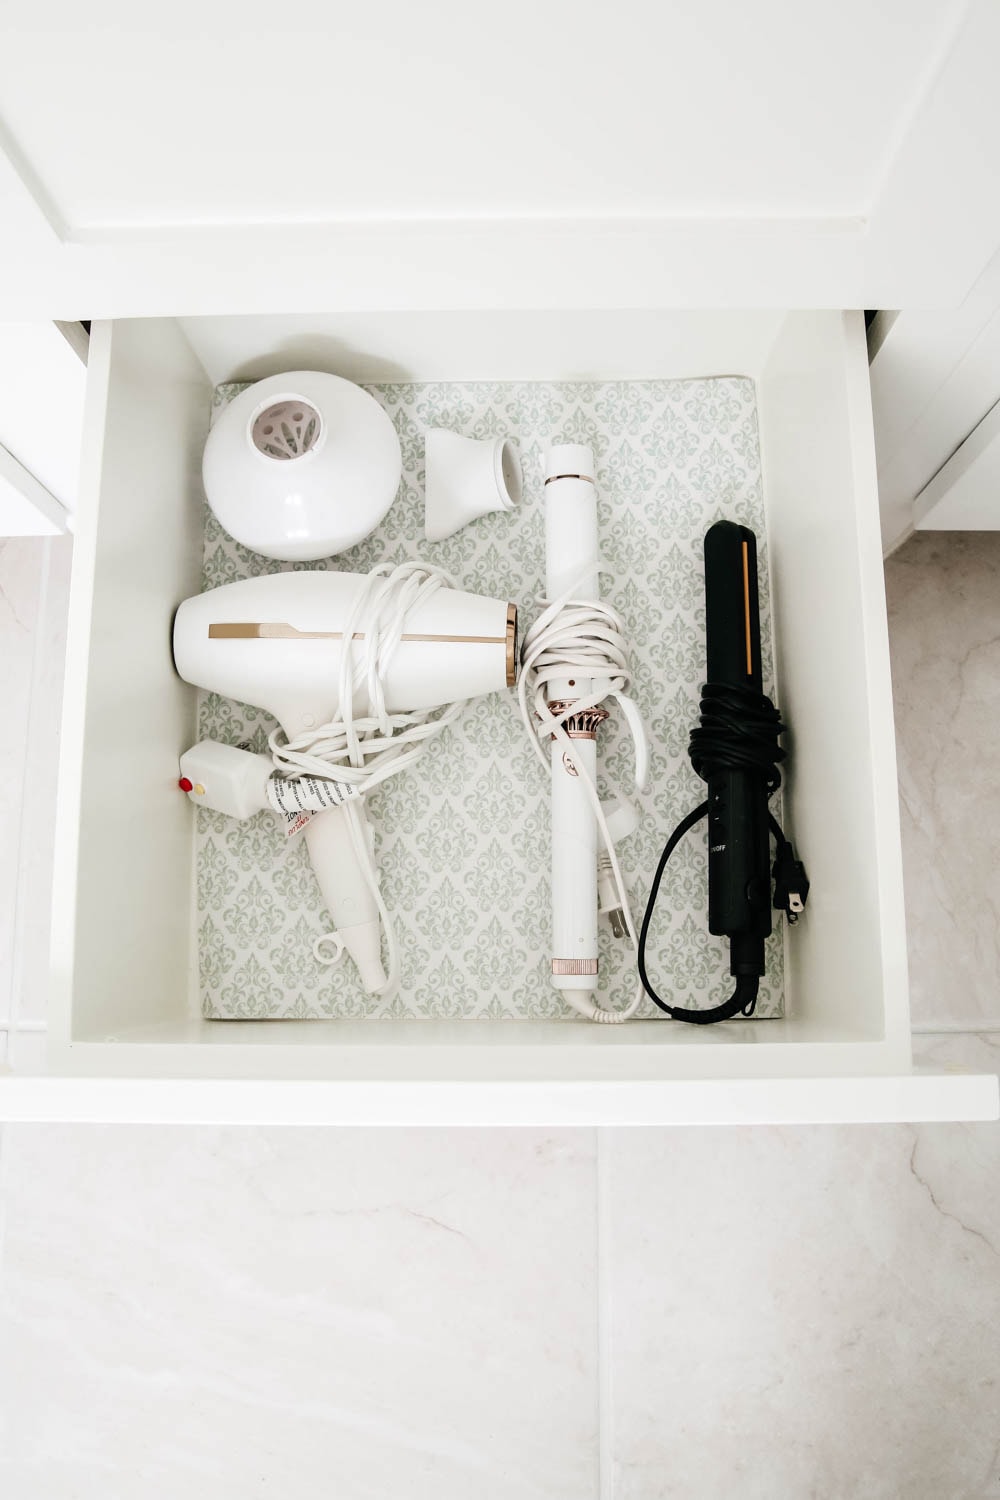 An easy hack to organize your bathroom cabinets and make them easy to clean + maintain to keep the clutter away. 